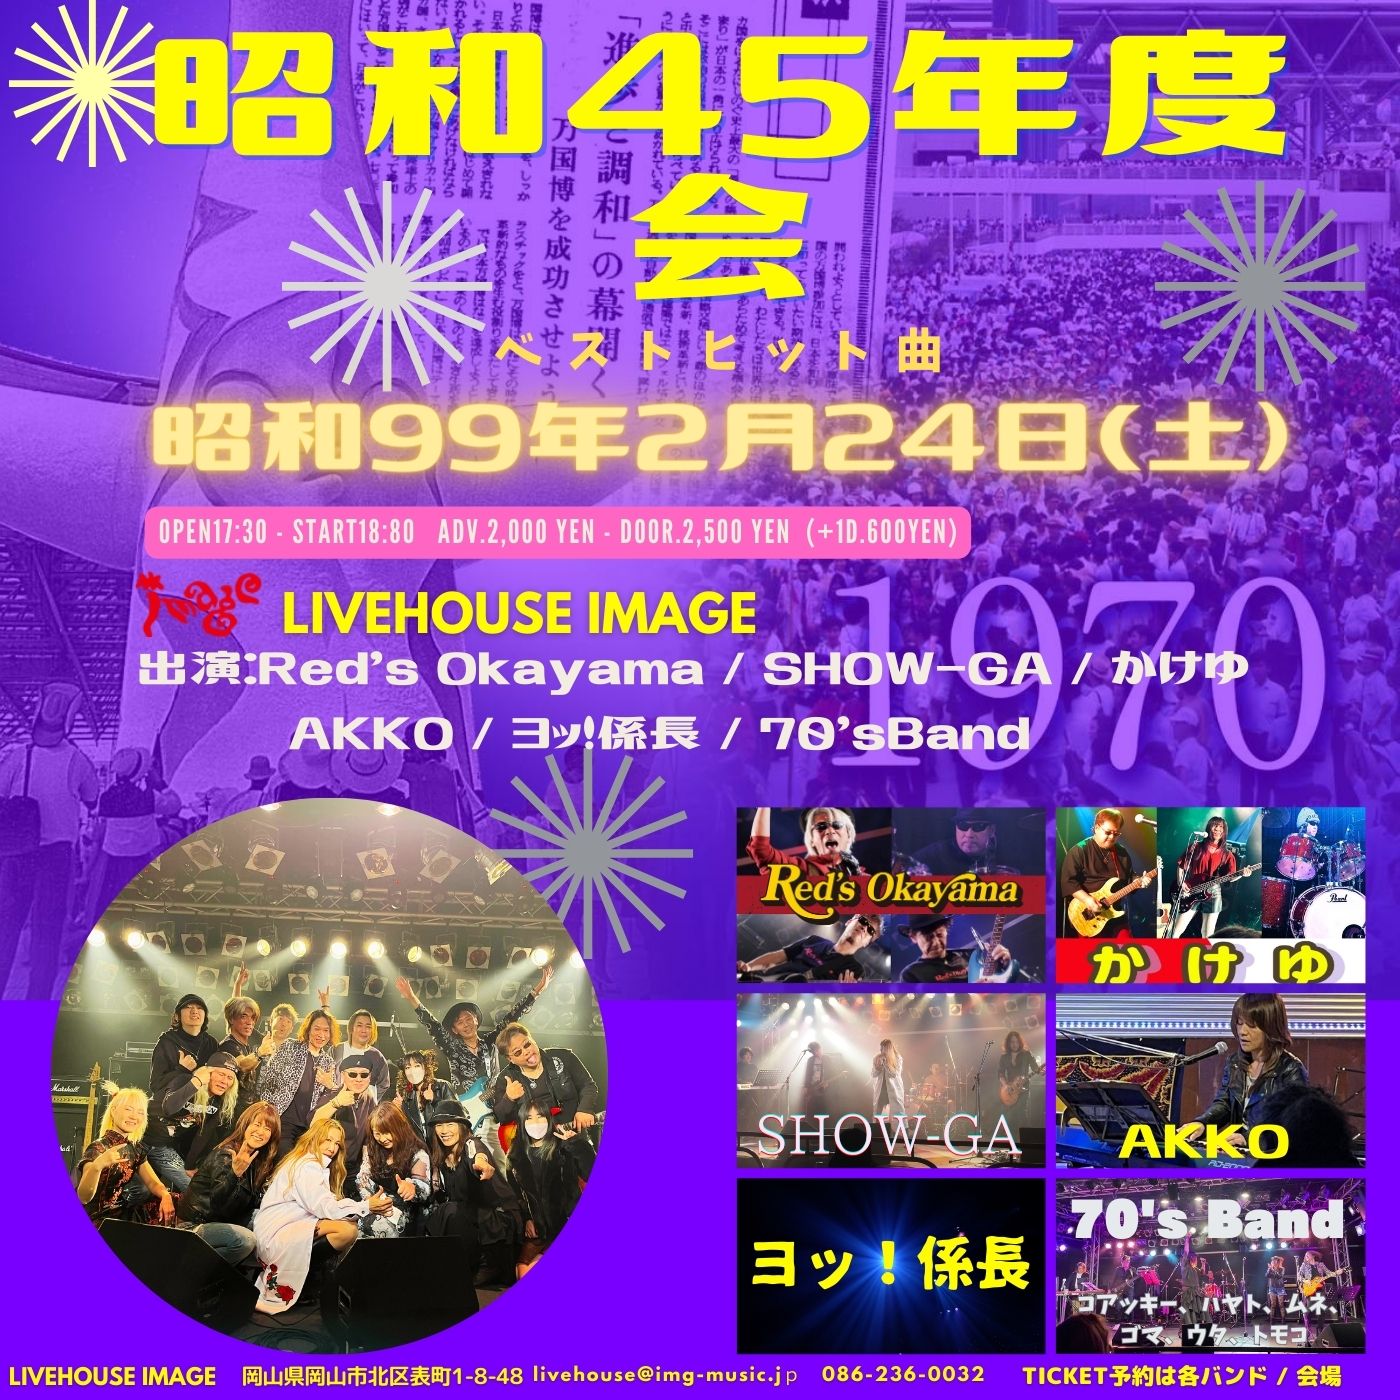 S45年度会～by Frends Born in 1970-1971～ Vol.2